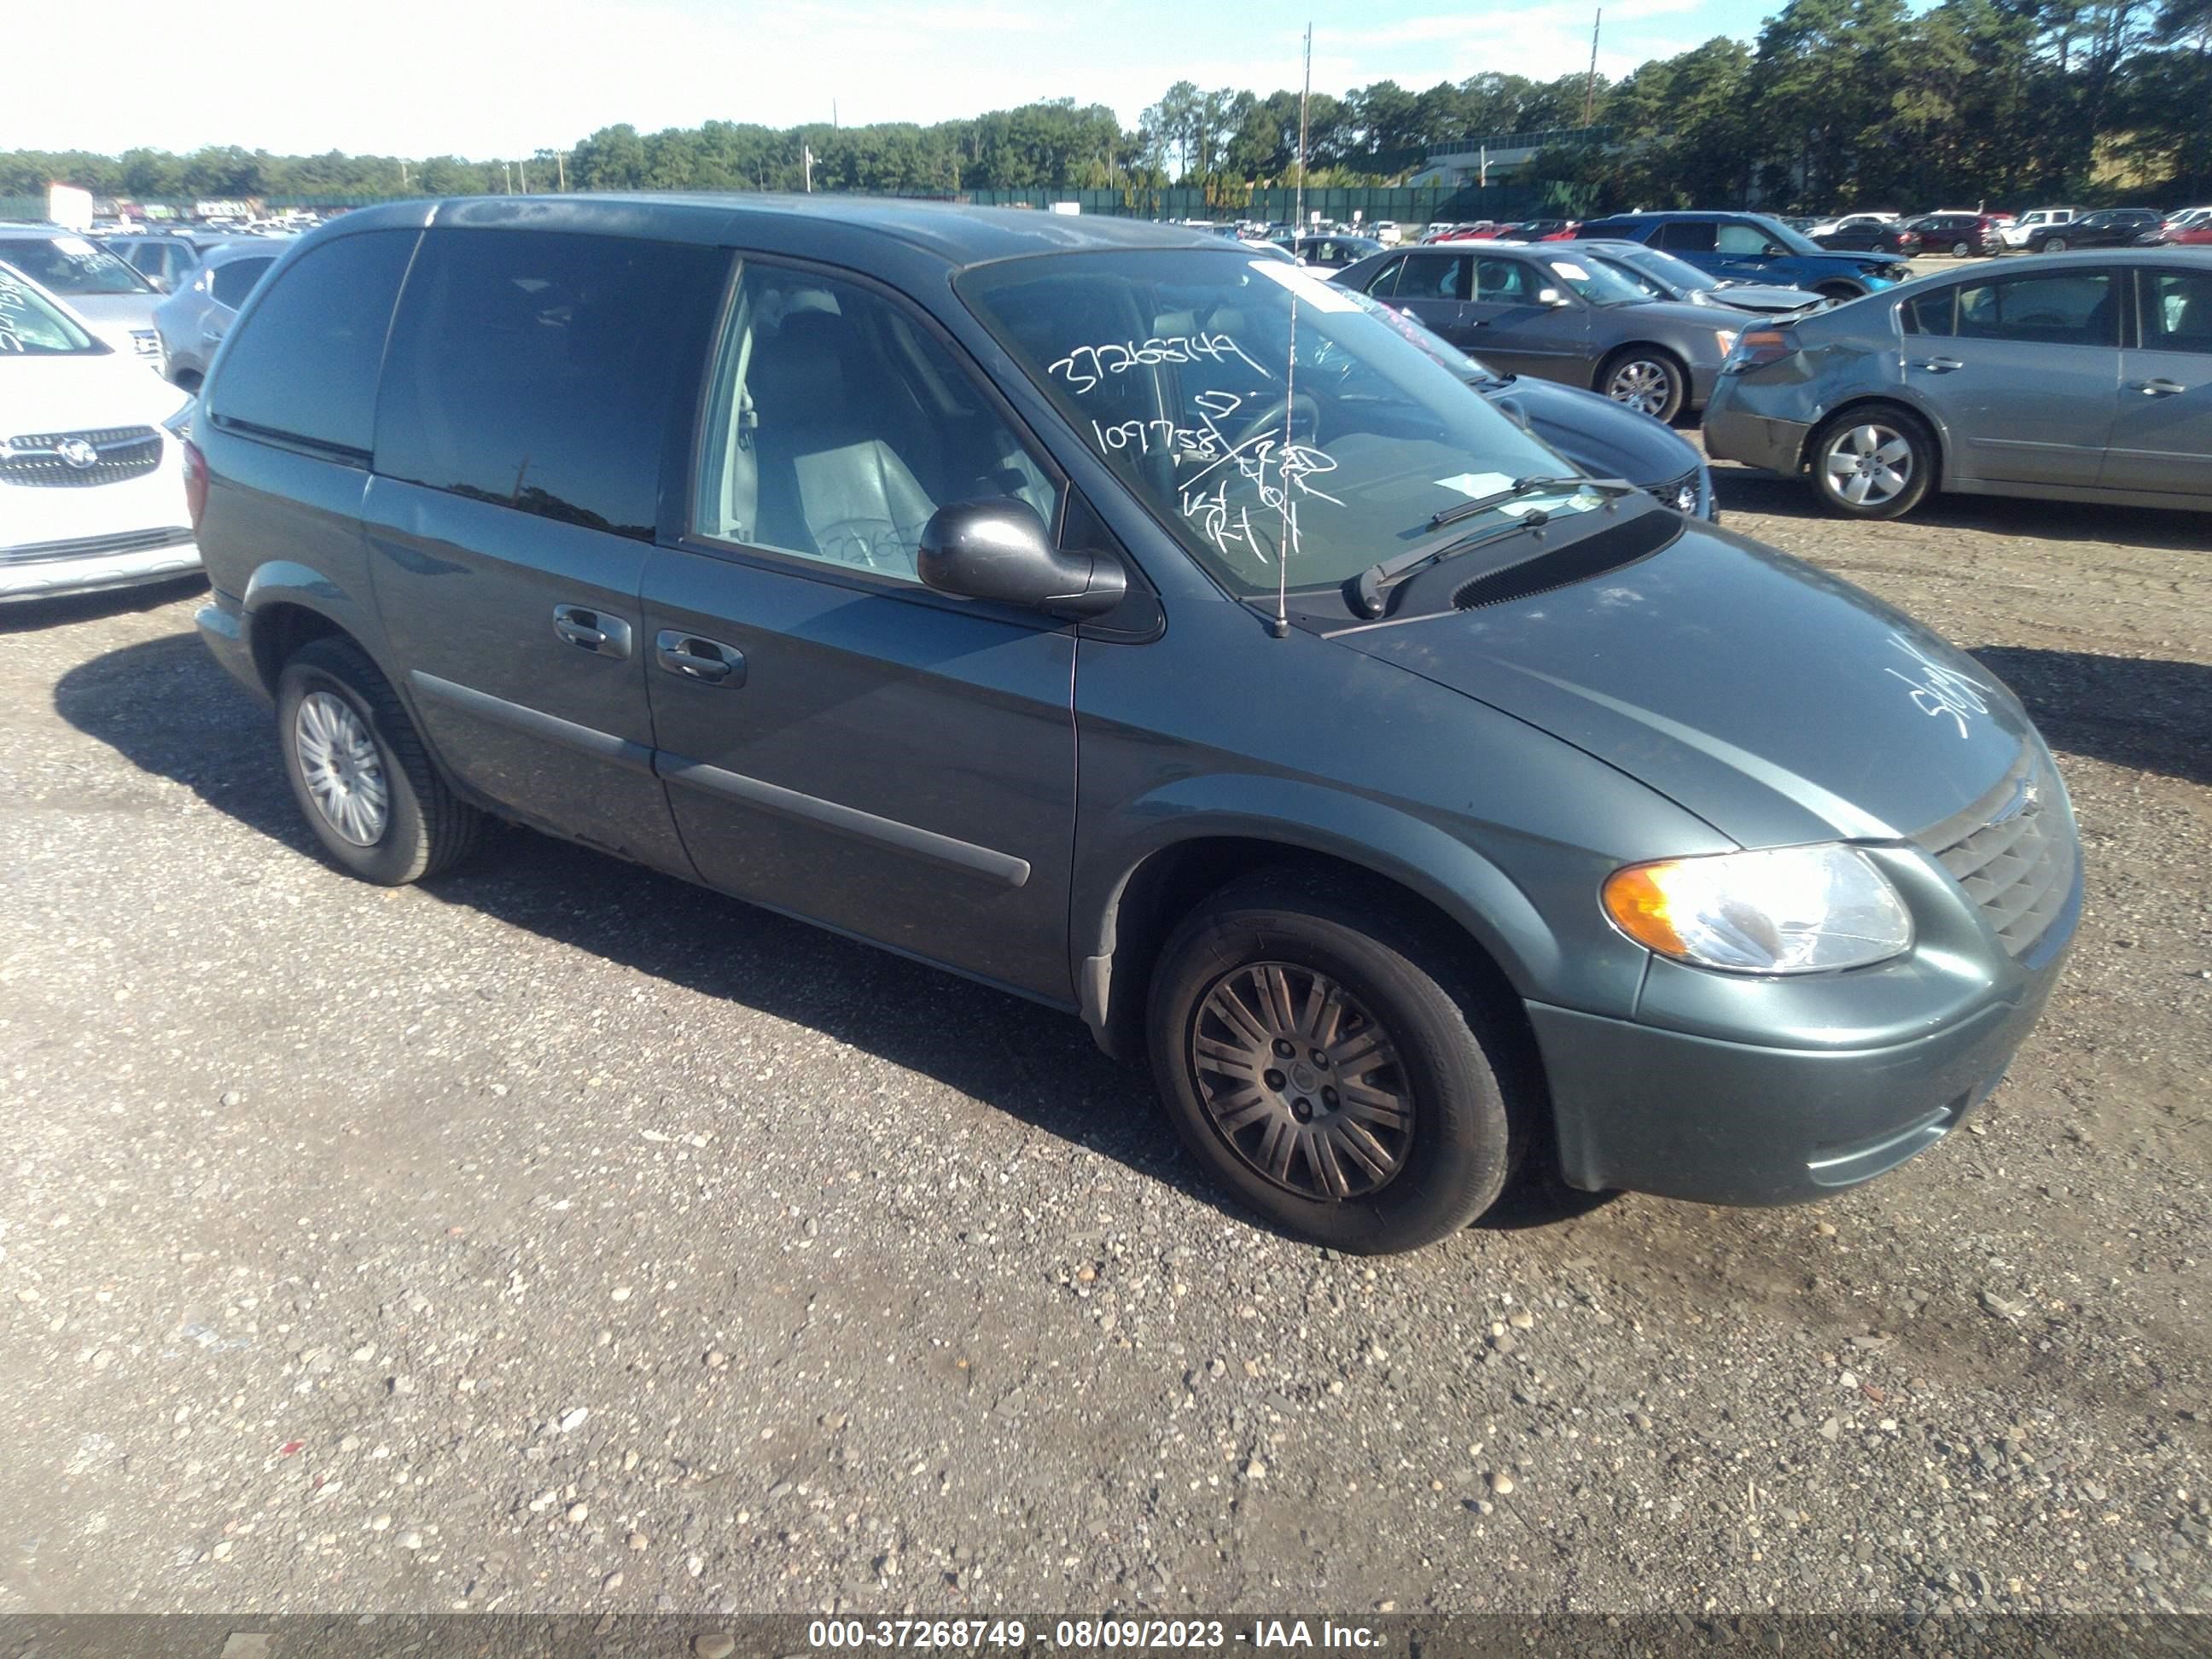 vin: 1A4GP45R76B645194 1A4GP45R76B645194 2006 chrysler town & country 3300 for Sale in 11763, 21 Peconic Ave, Medford, New York, USA